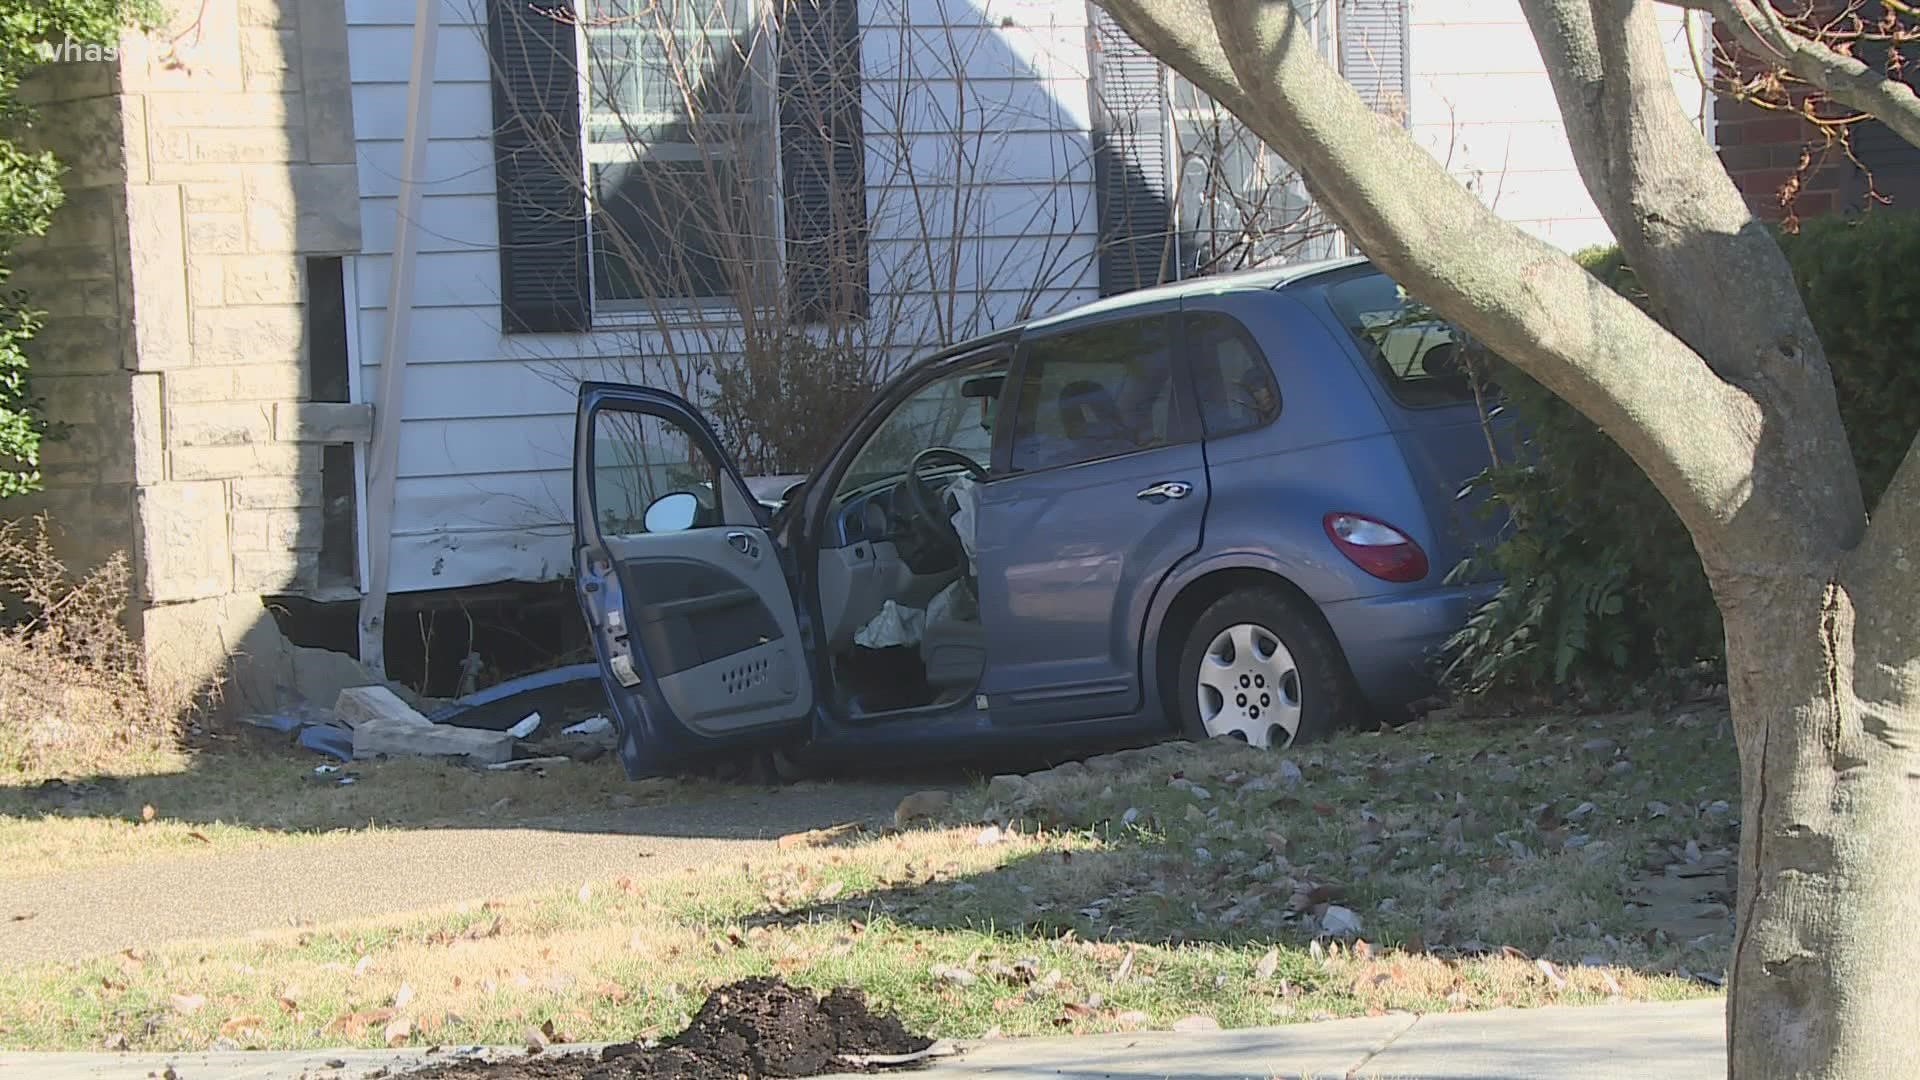 Police said a driver had some type of medical emergency, causing his car to crash into a Winchester Road home on Sunday.